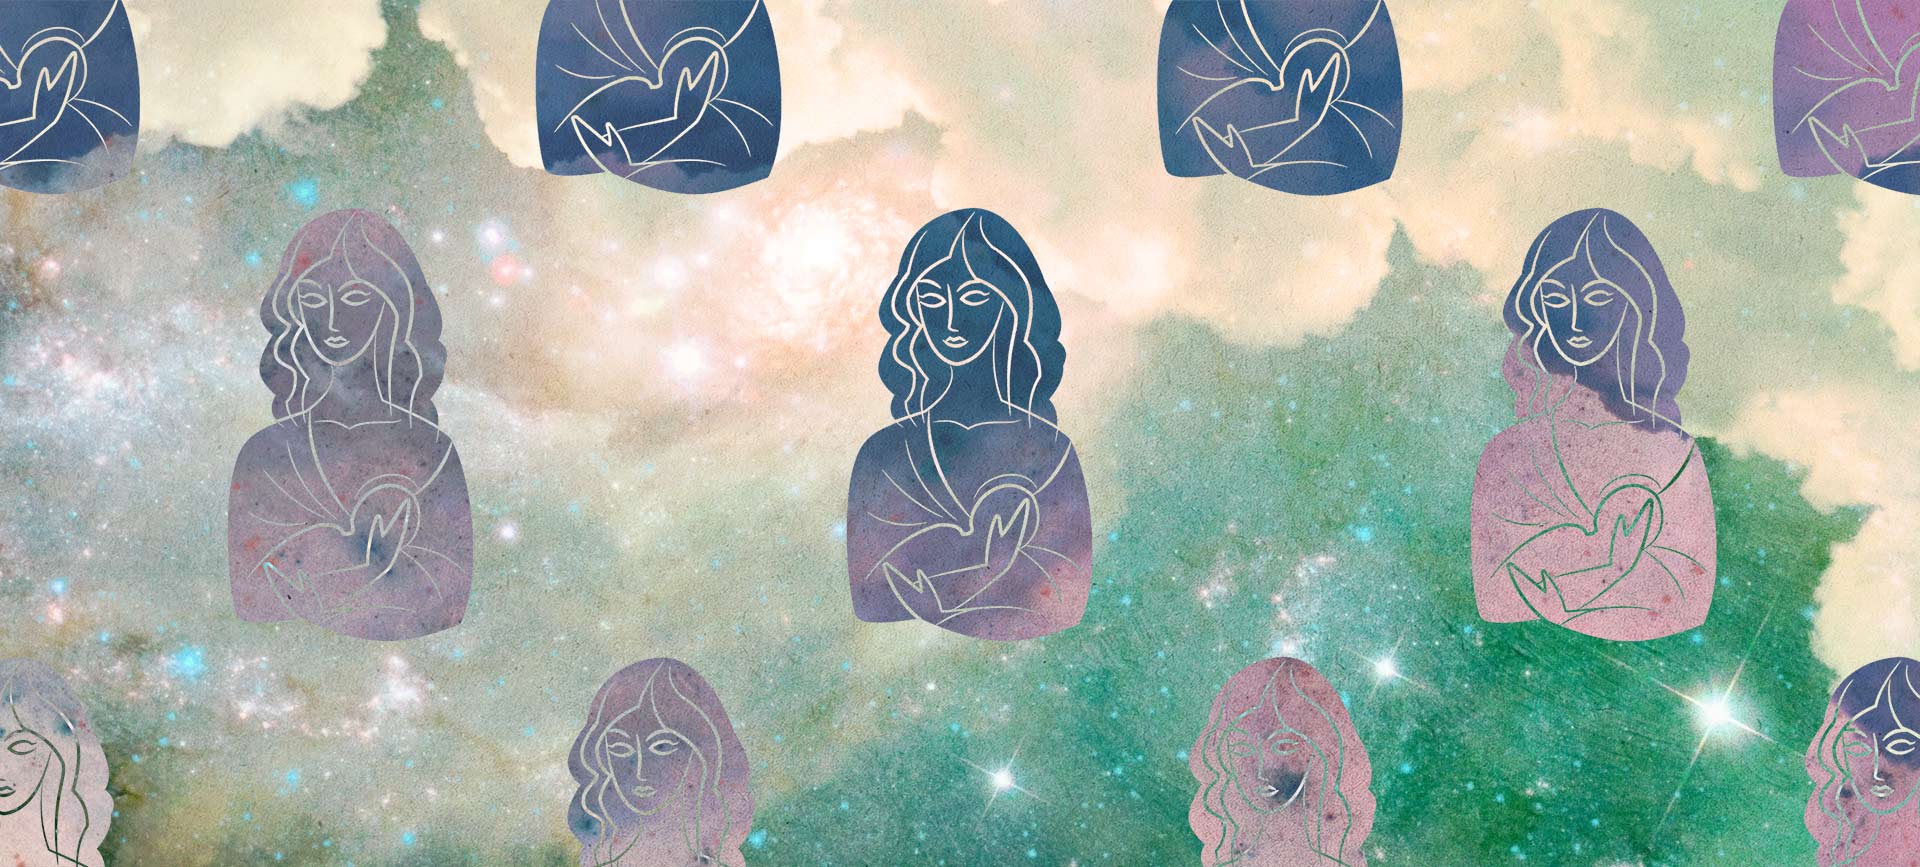 Multiple women are breastfeeding against a green and yellow starry background.